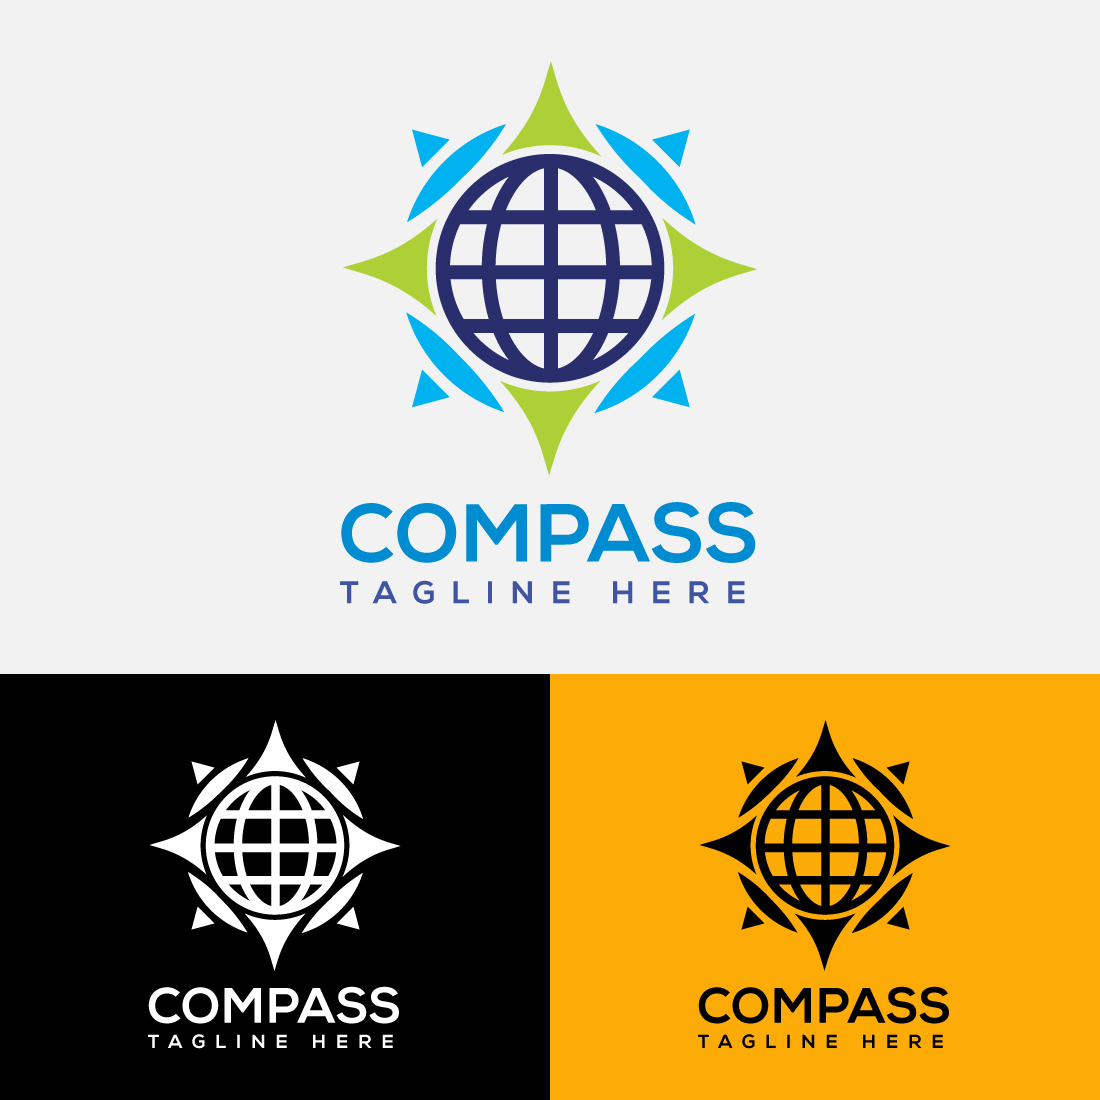 Pack of images of beautiful round logos in the form of a compass.